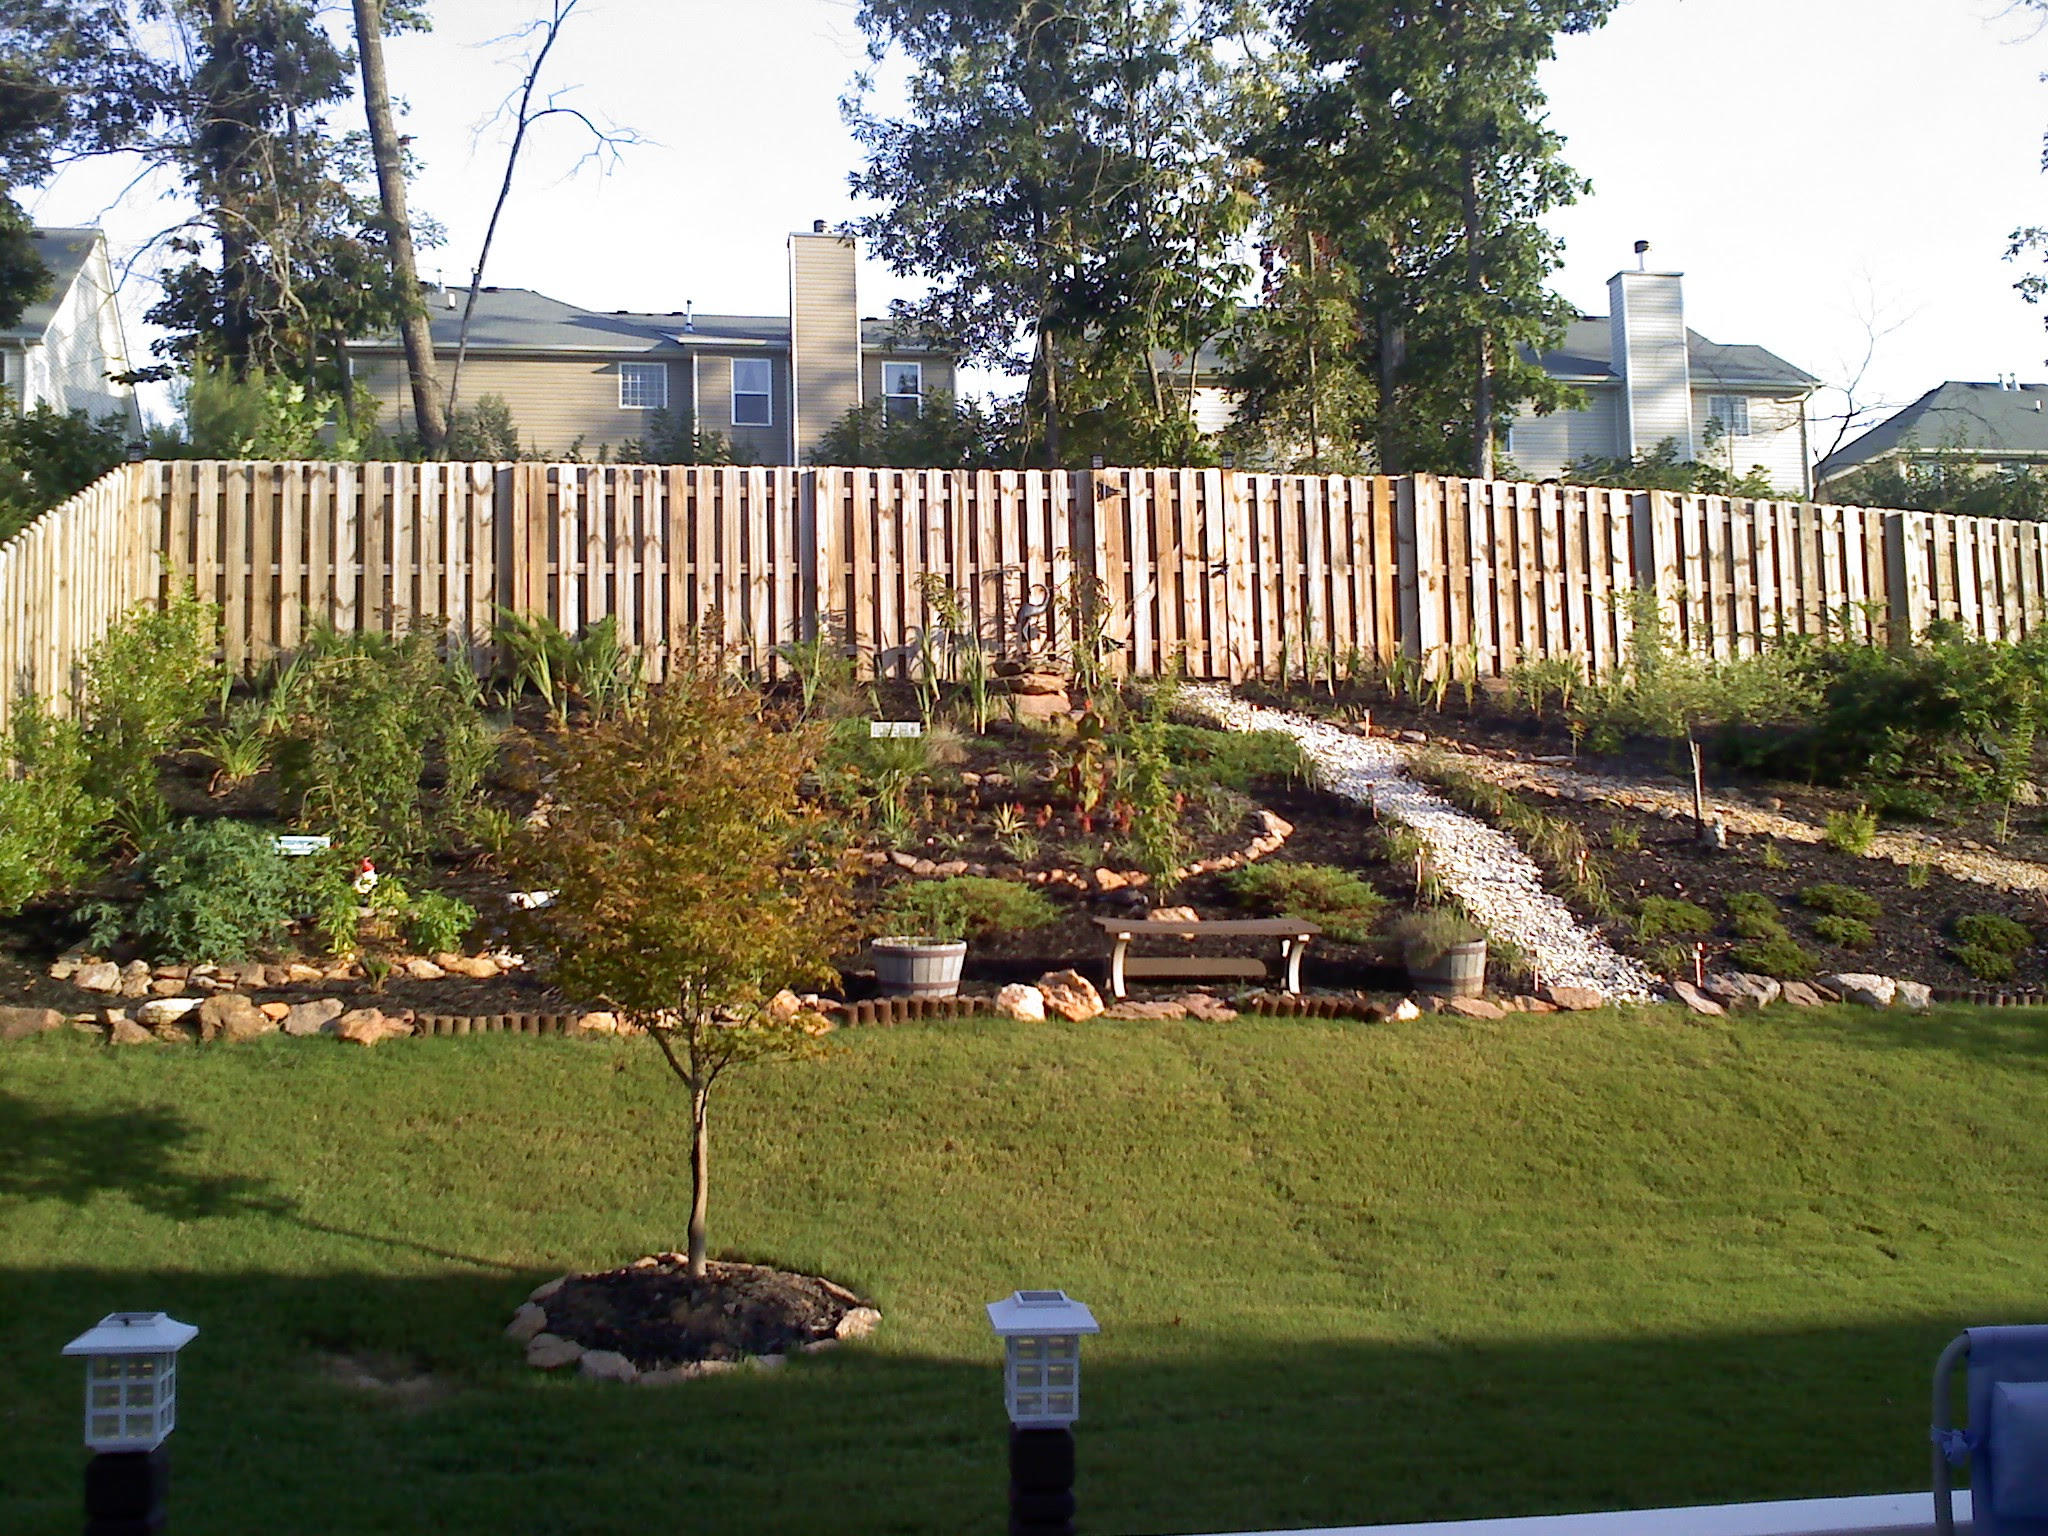 Should We Install A Retaining Wall In Our Backyard Engineered Foundation Pools House Remodeling Decorating Construction Energy Use Kitchen Bathroom Bedroom Building Rooms City Data Forum